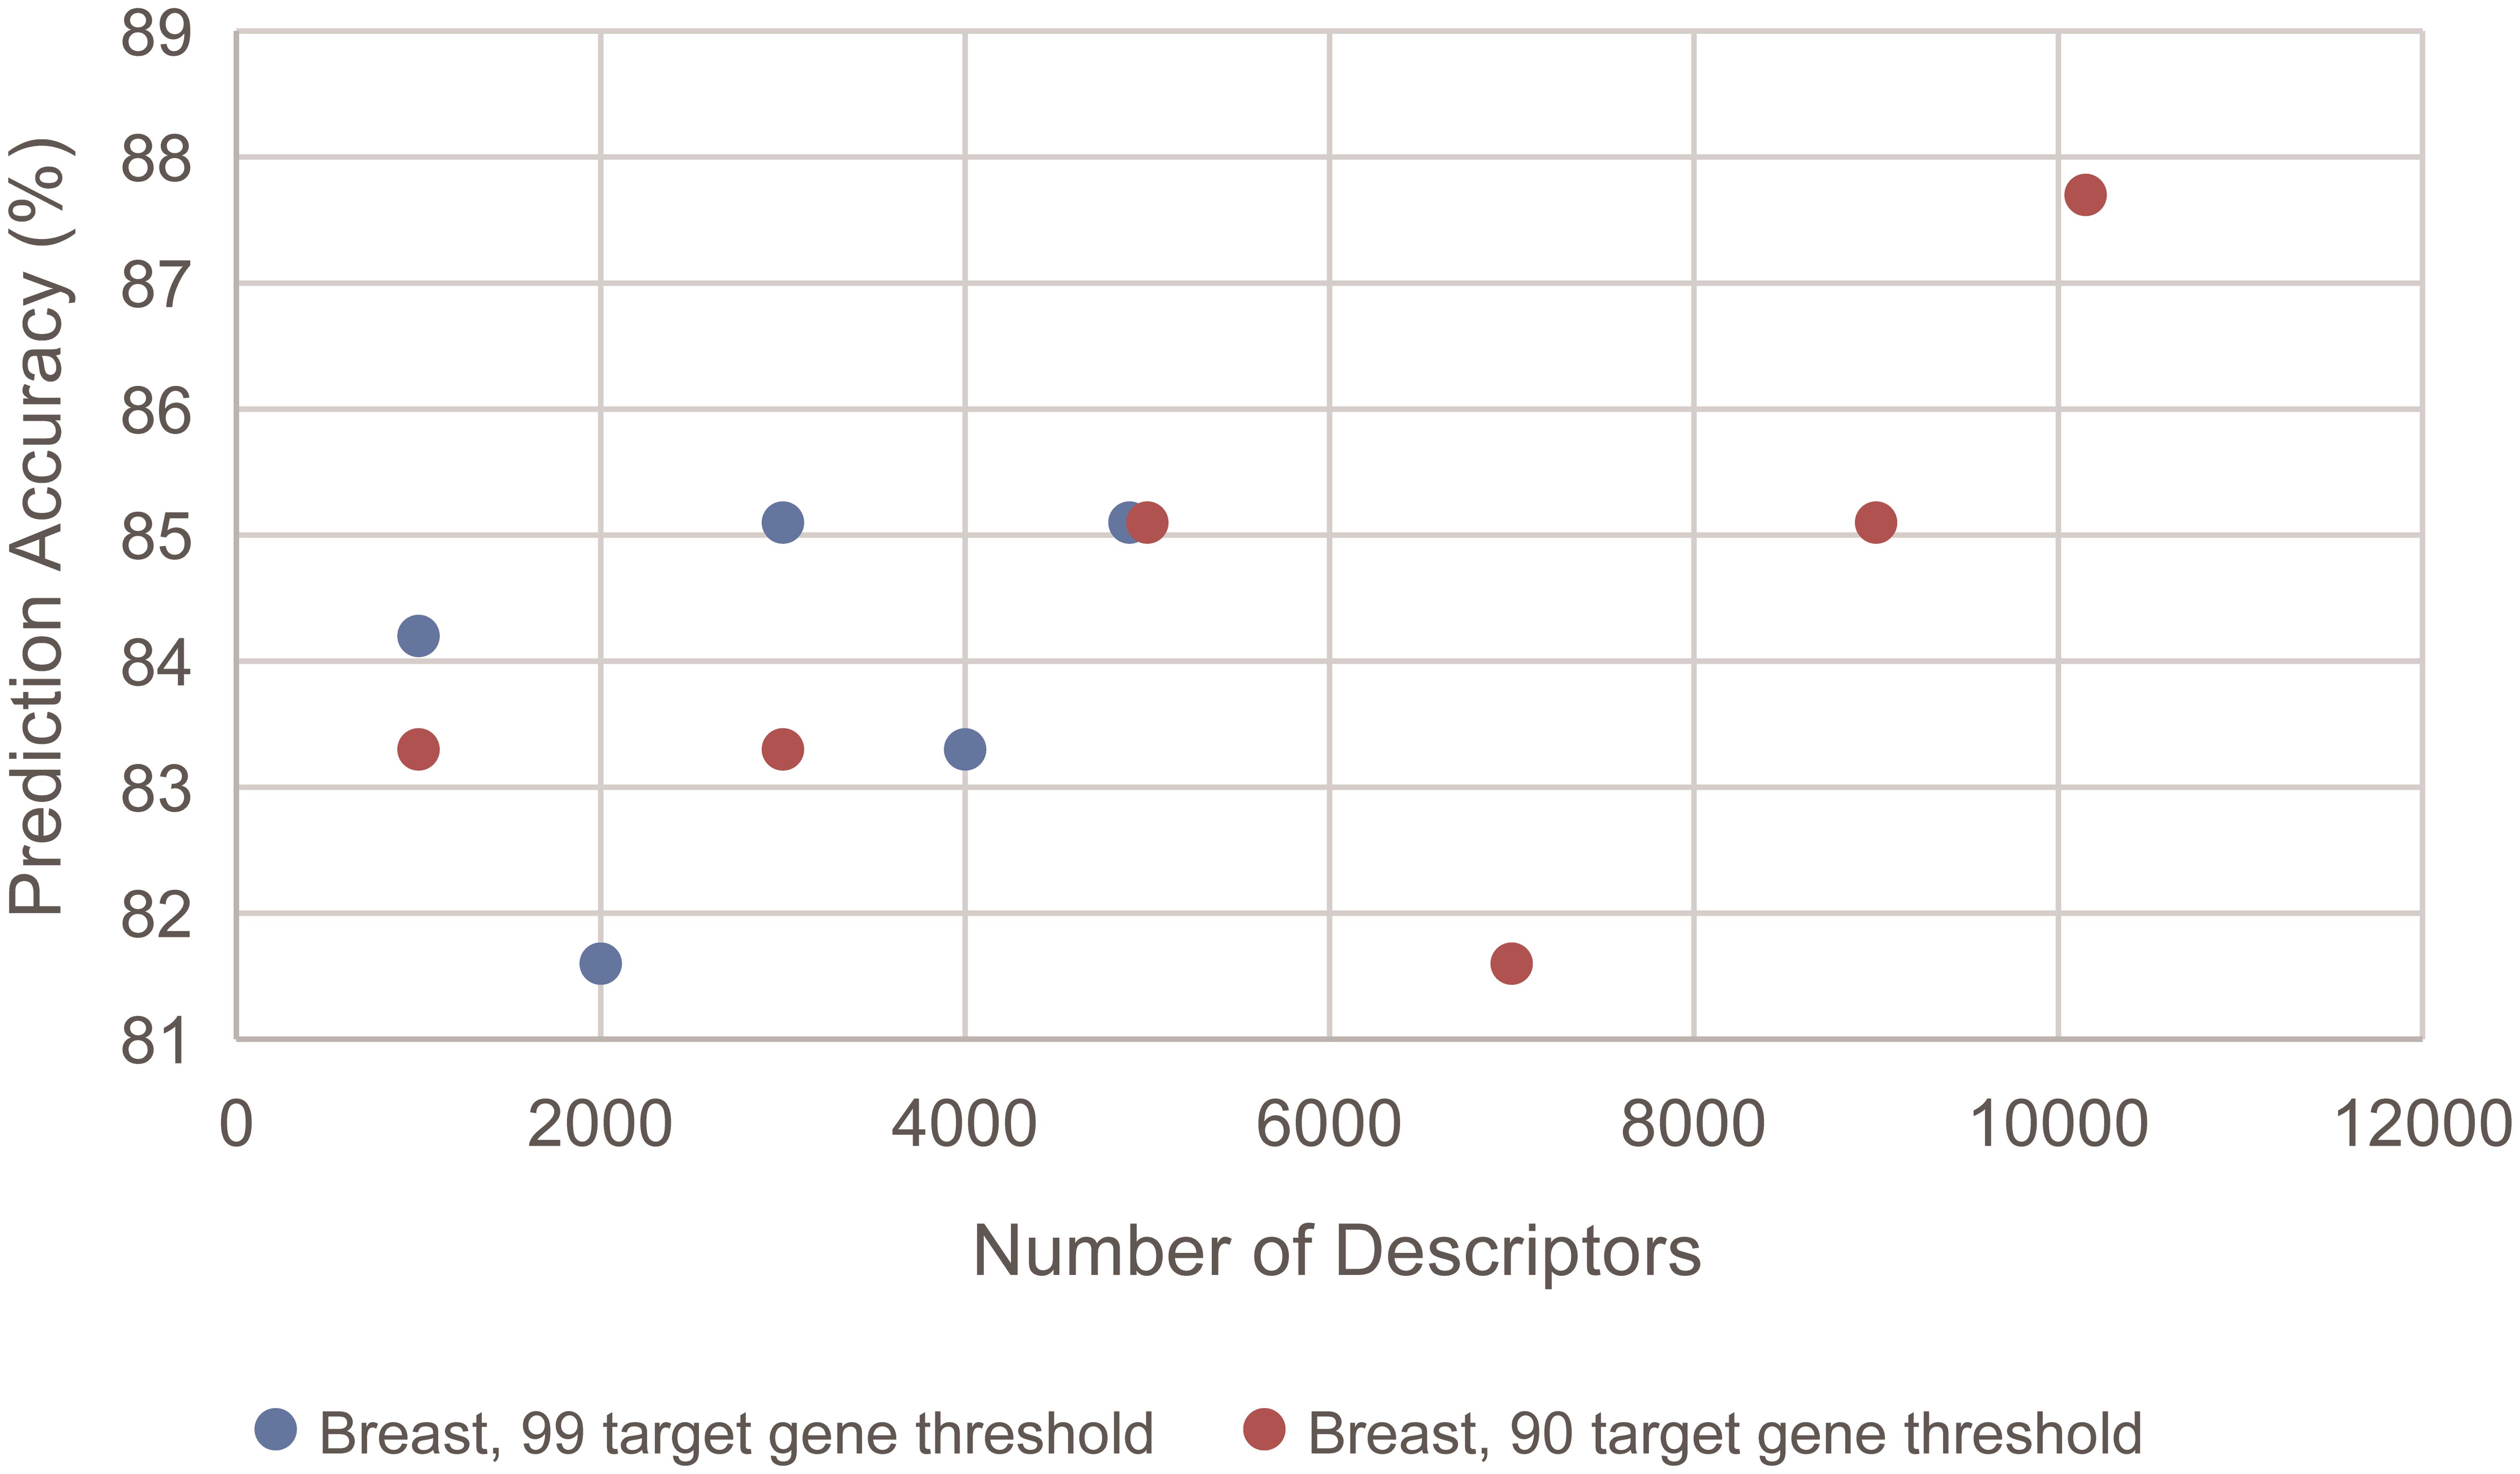 Comparison of the prediction accuracy for the breast cancer model with different numbers of descriptors.